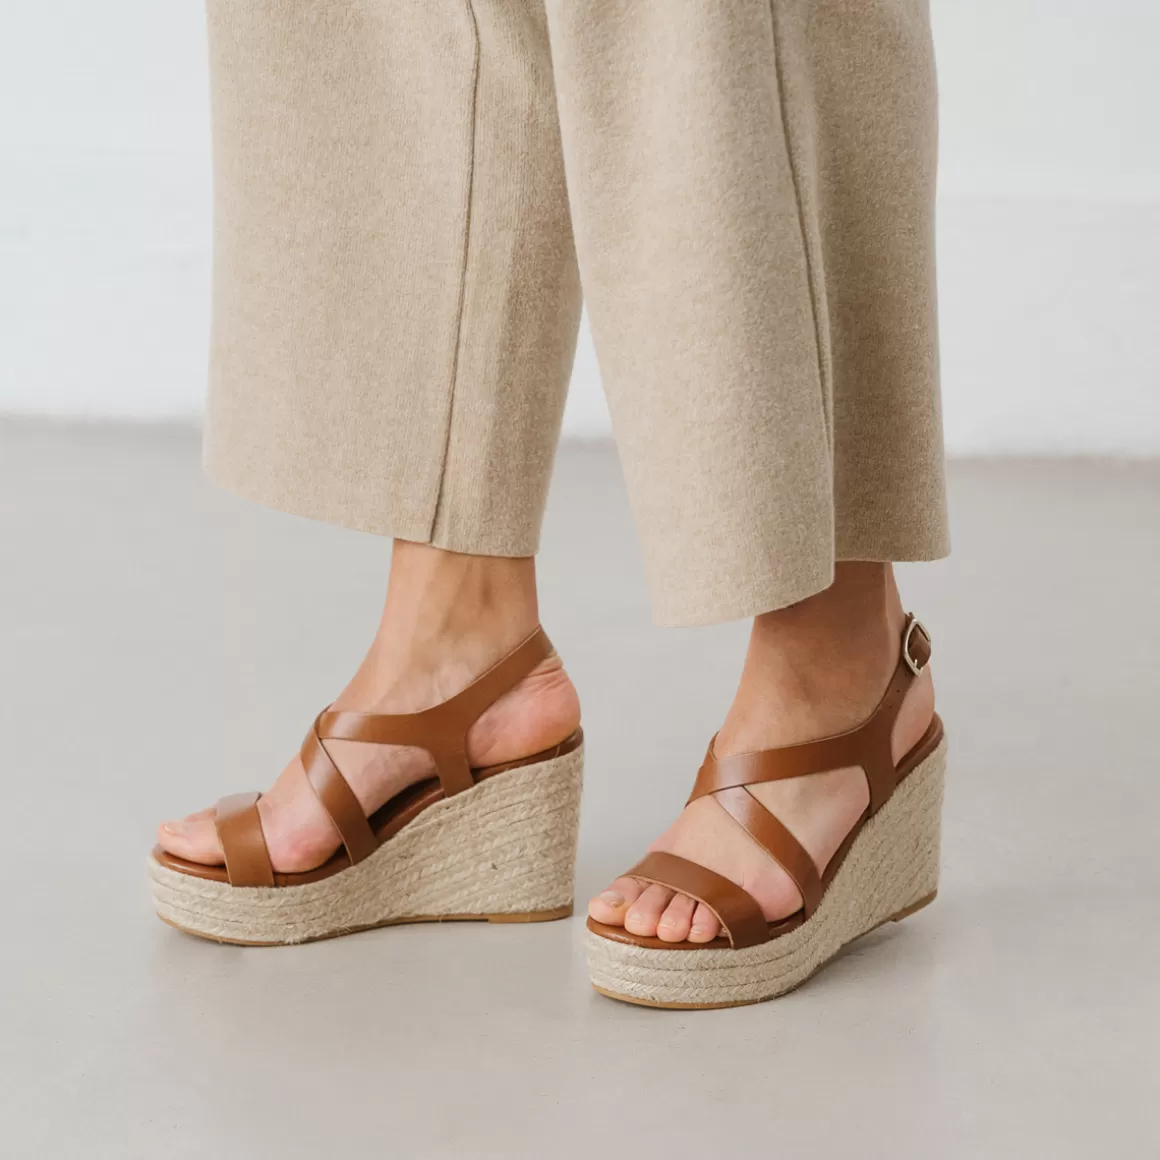 Espadrilles with cross-over straps<Jonak Cheap